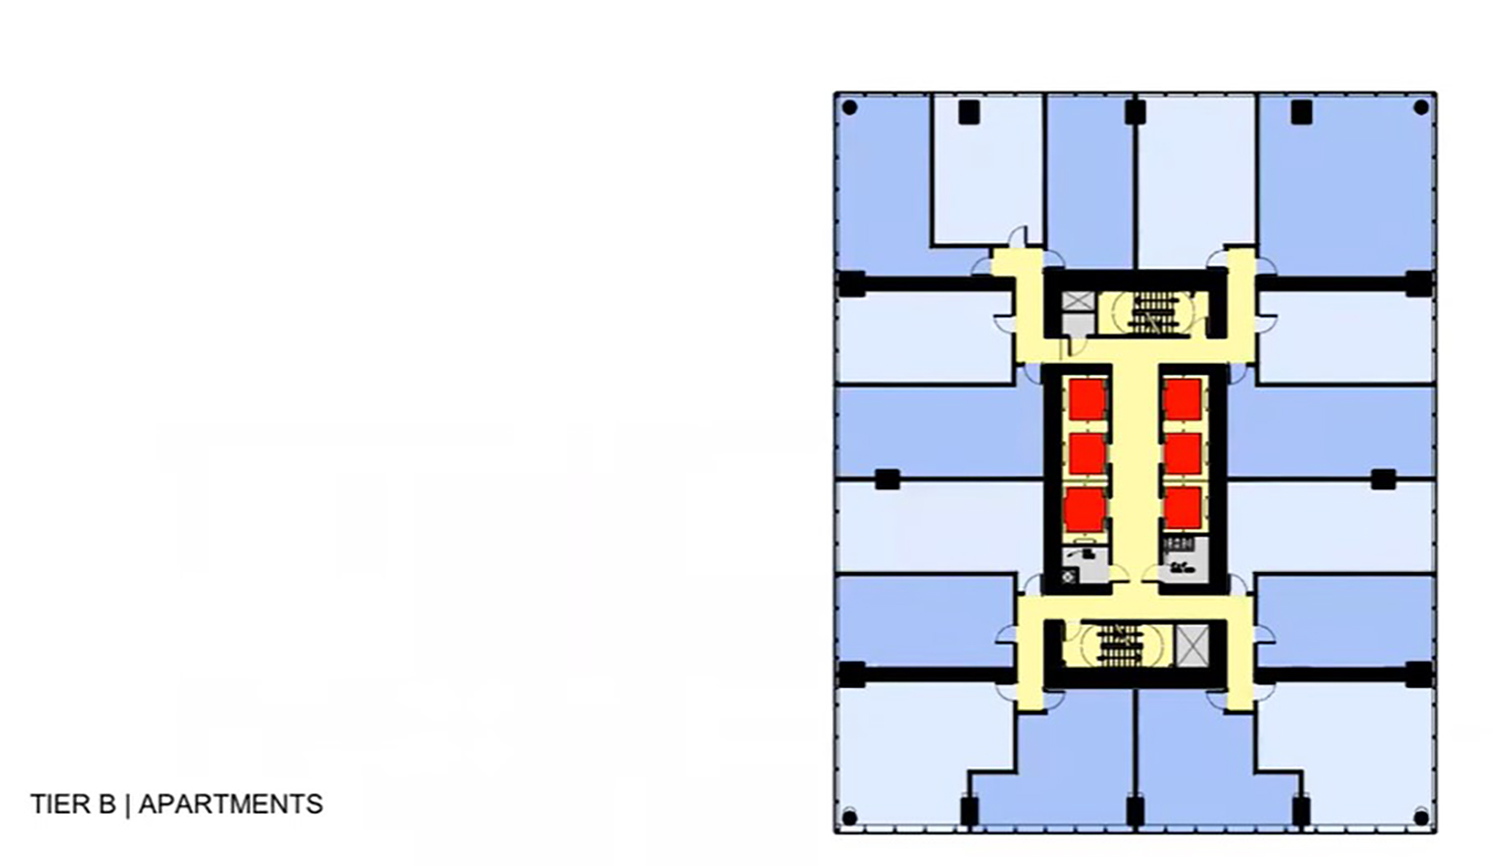 Typical Floor Plan for Tier B Apartments at 1000M. Drawing by JAHN